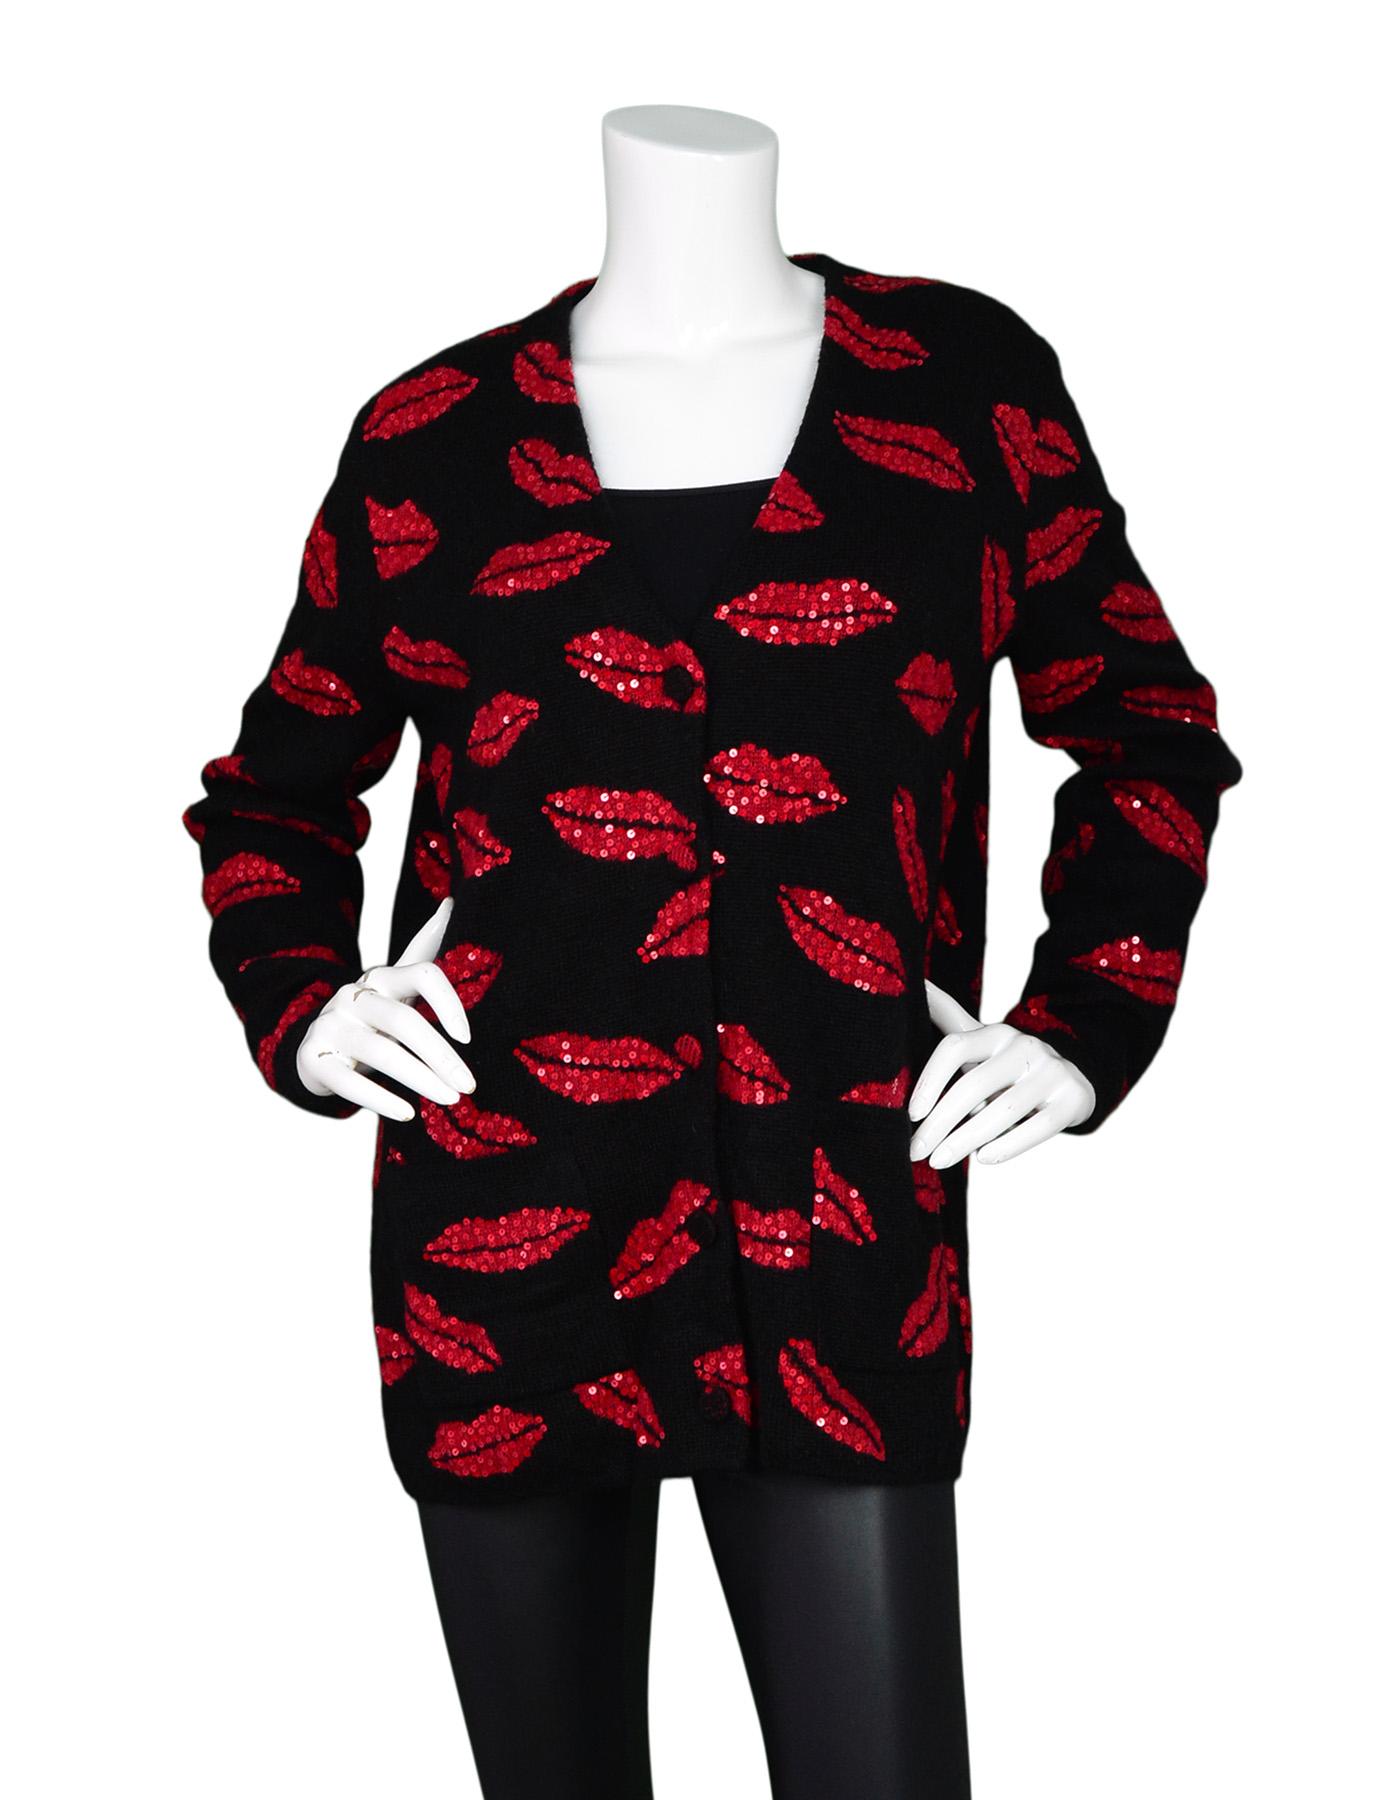 Saint Laurent Black Cardigan W/ Sequin Red Lip Print Oversized Sz M

Made In: Italy
Color: Black and red 
Materials: 40% acrylic, 30% mohair, 30 polyamide
Opening/Closure: Button up front
Overall Condition: New with tags condition 
Estimated Retail: